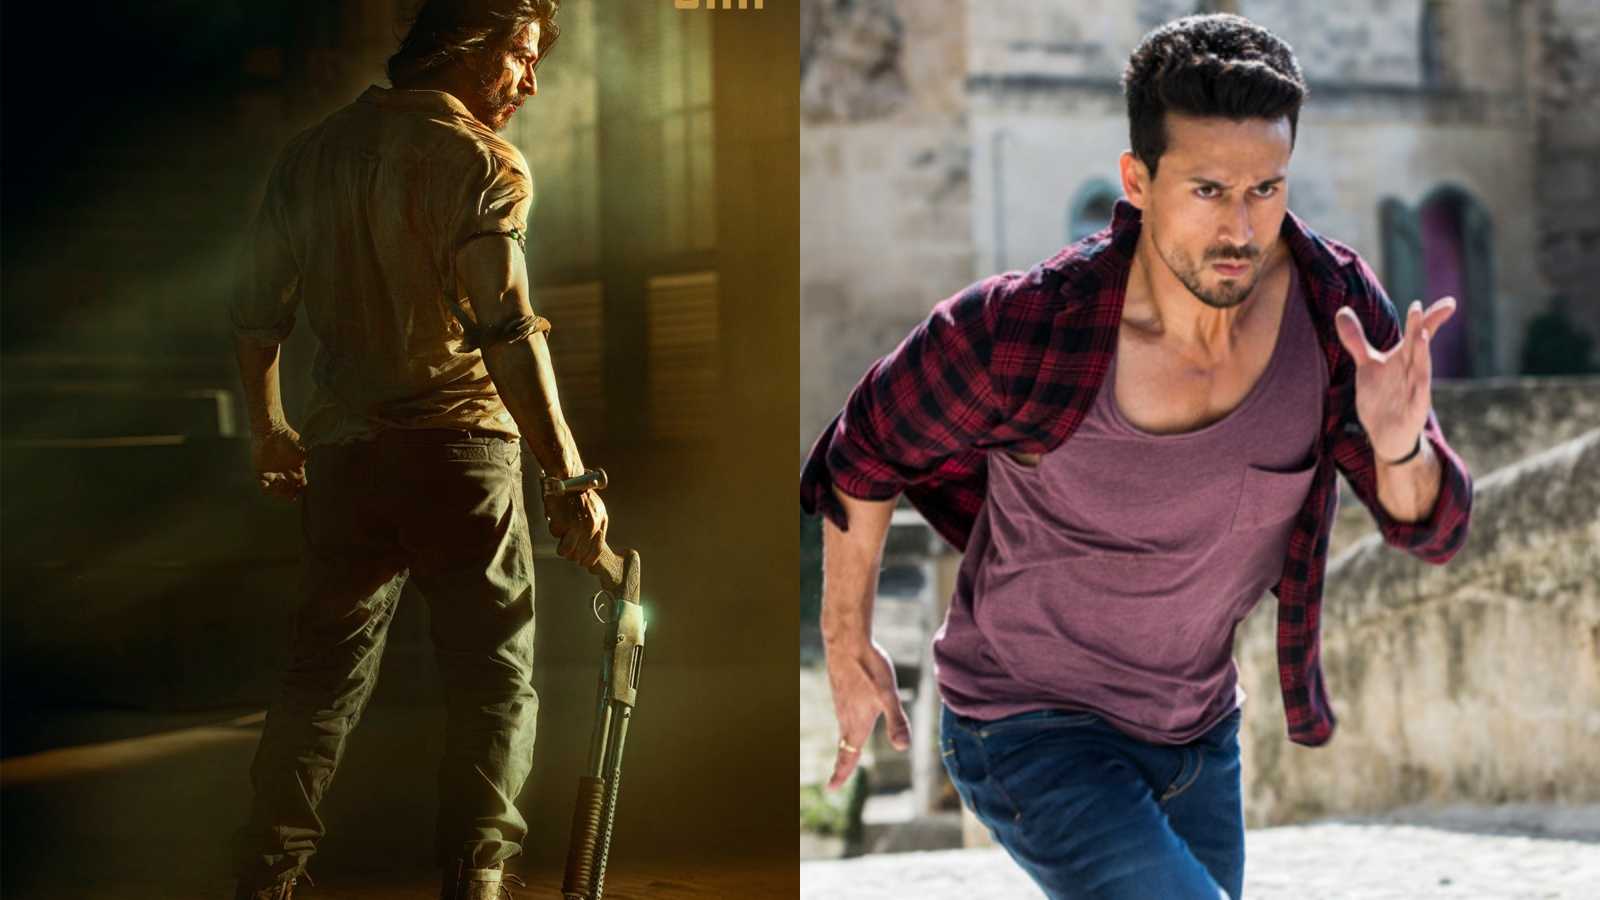 Shah Rukh Khan wants to work with Tiger Shroff one day after watching WAR:  'My action is not half as good as yours'